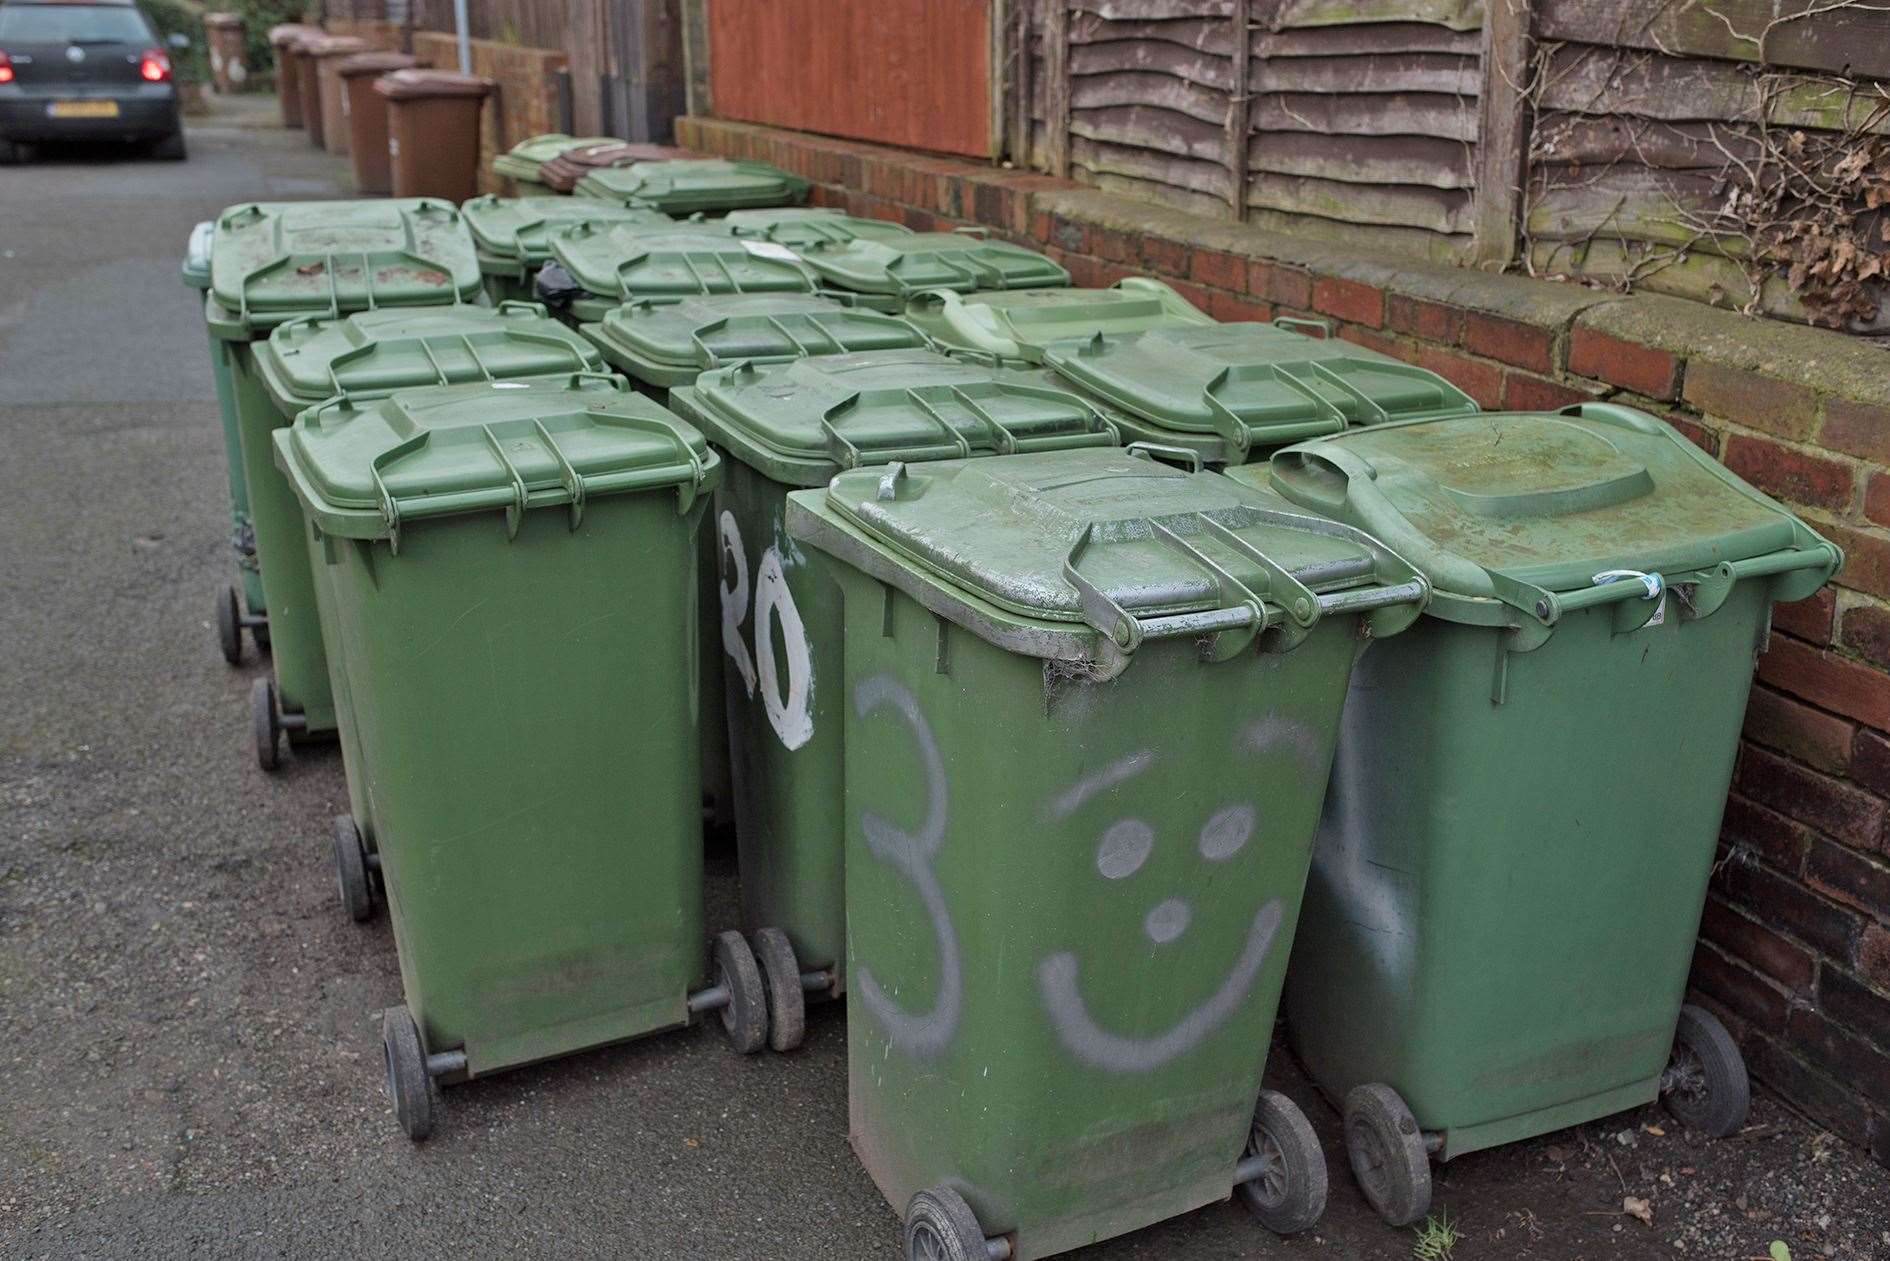 Plans by Highland Council to introduce a new bins have prompted criticism.